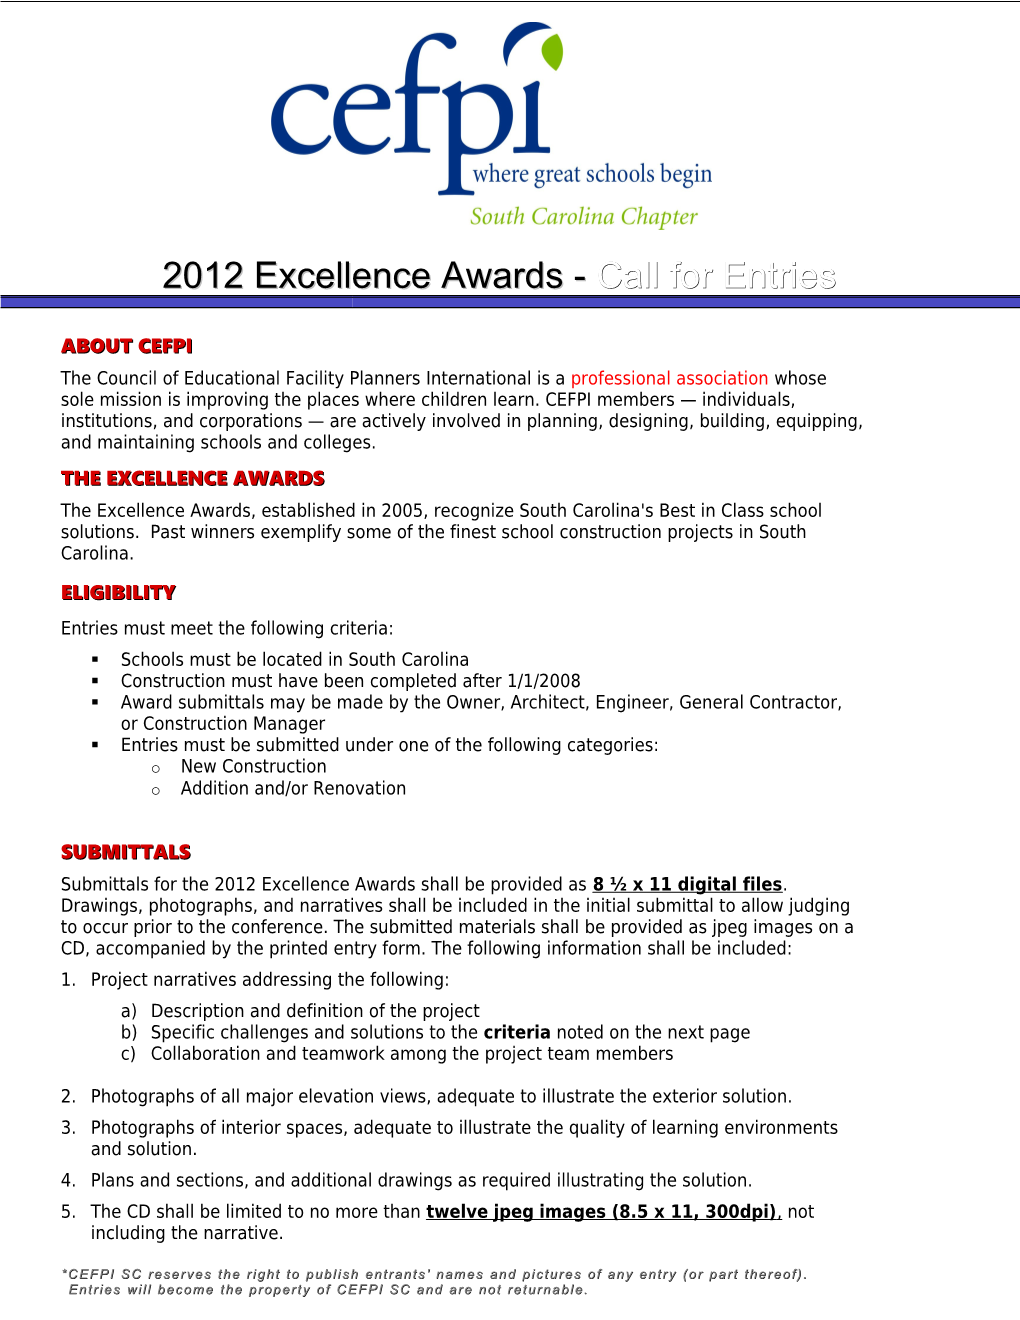 The Excellence Awards